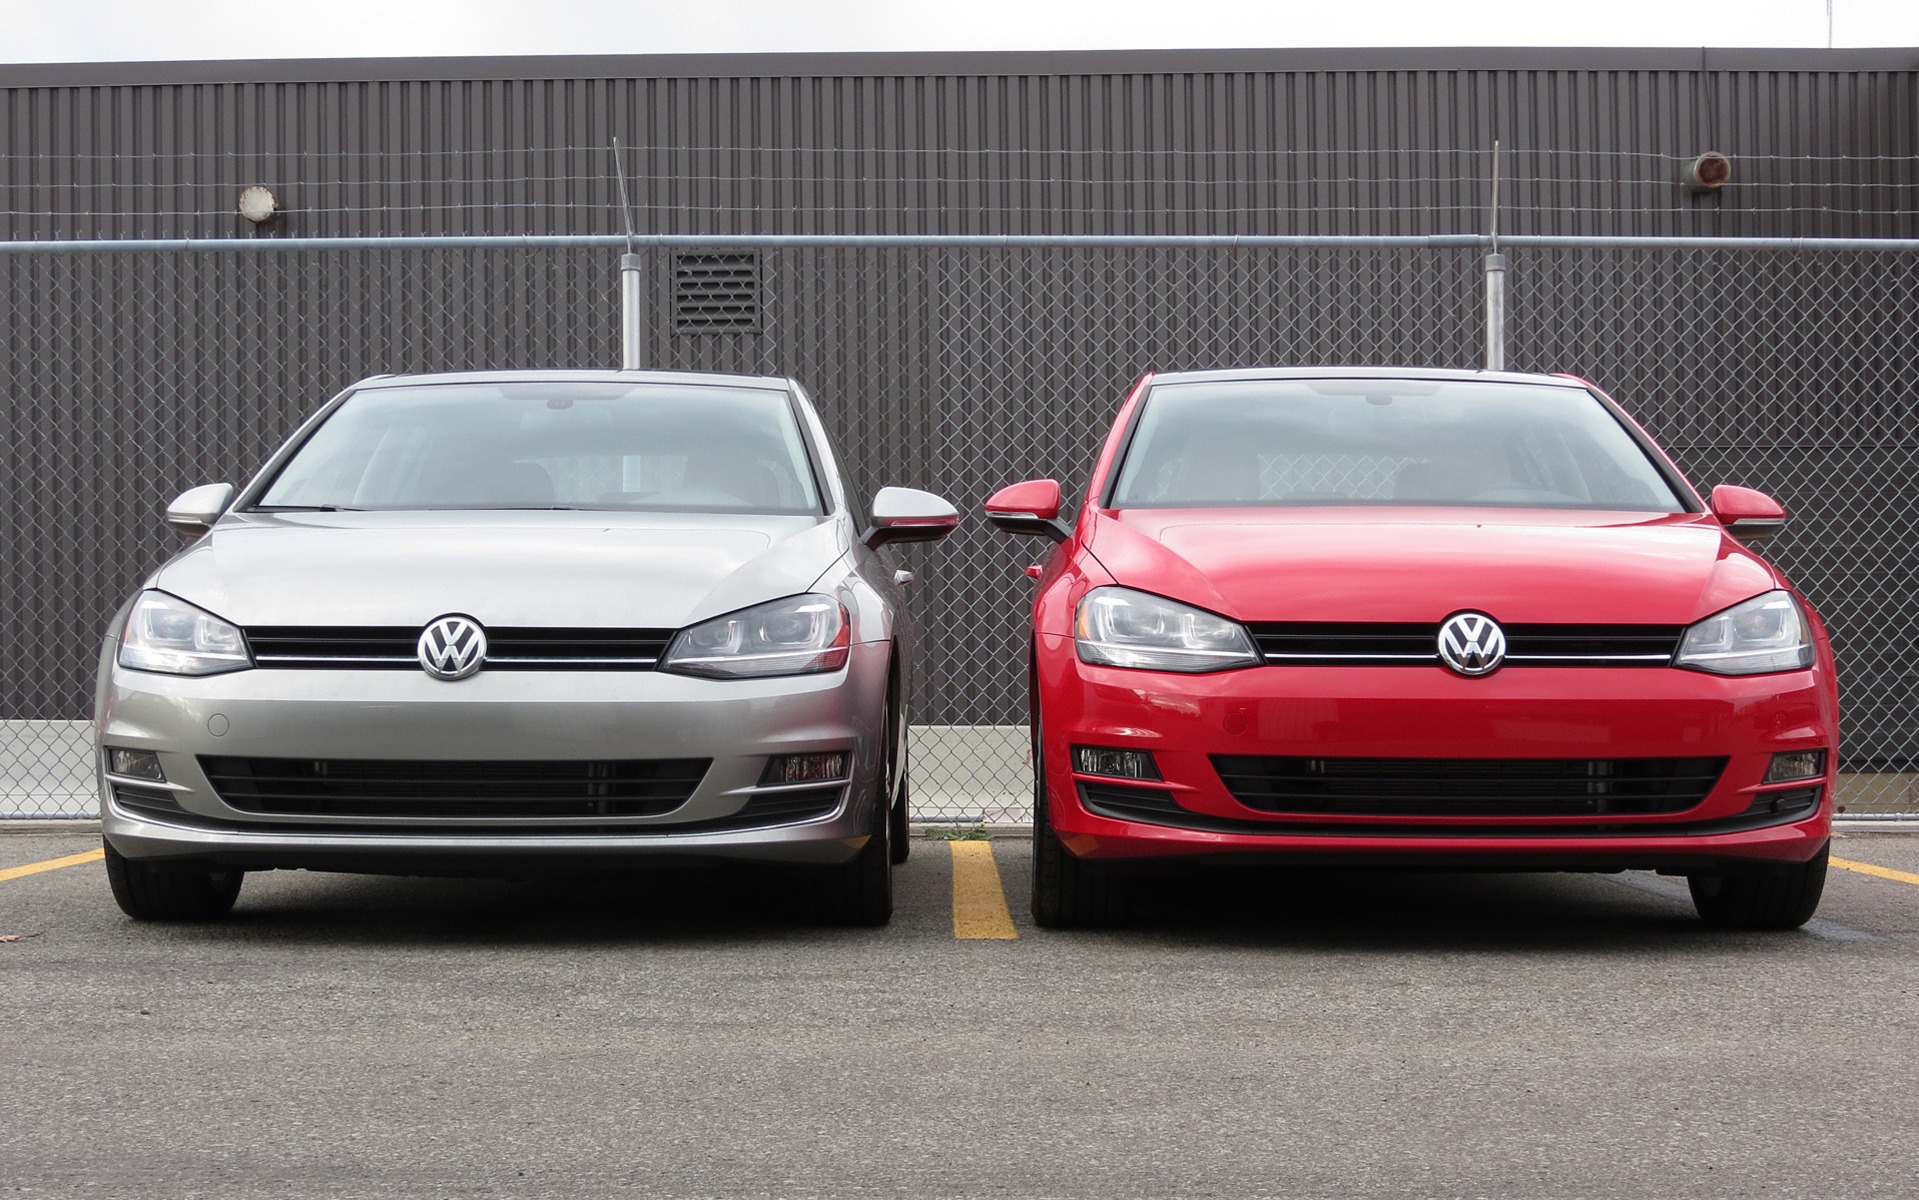 Volkswagen Golf Tdi Versus Golf Tsi 2015 Two Tests Over 4 000 Km The Car Guide